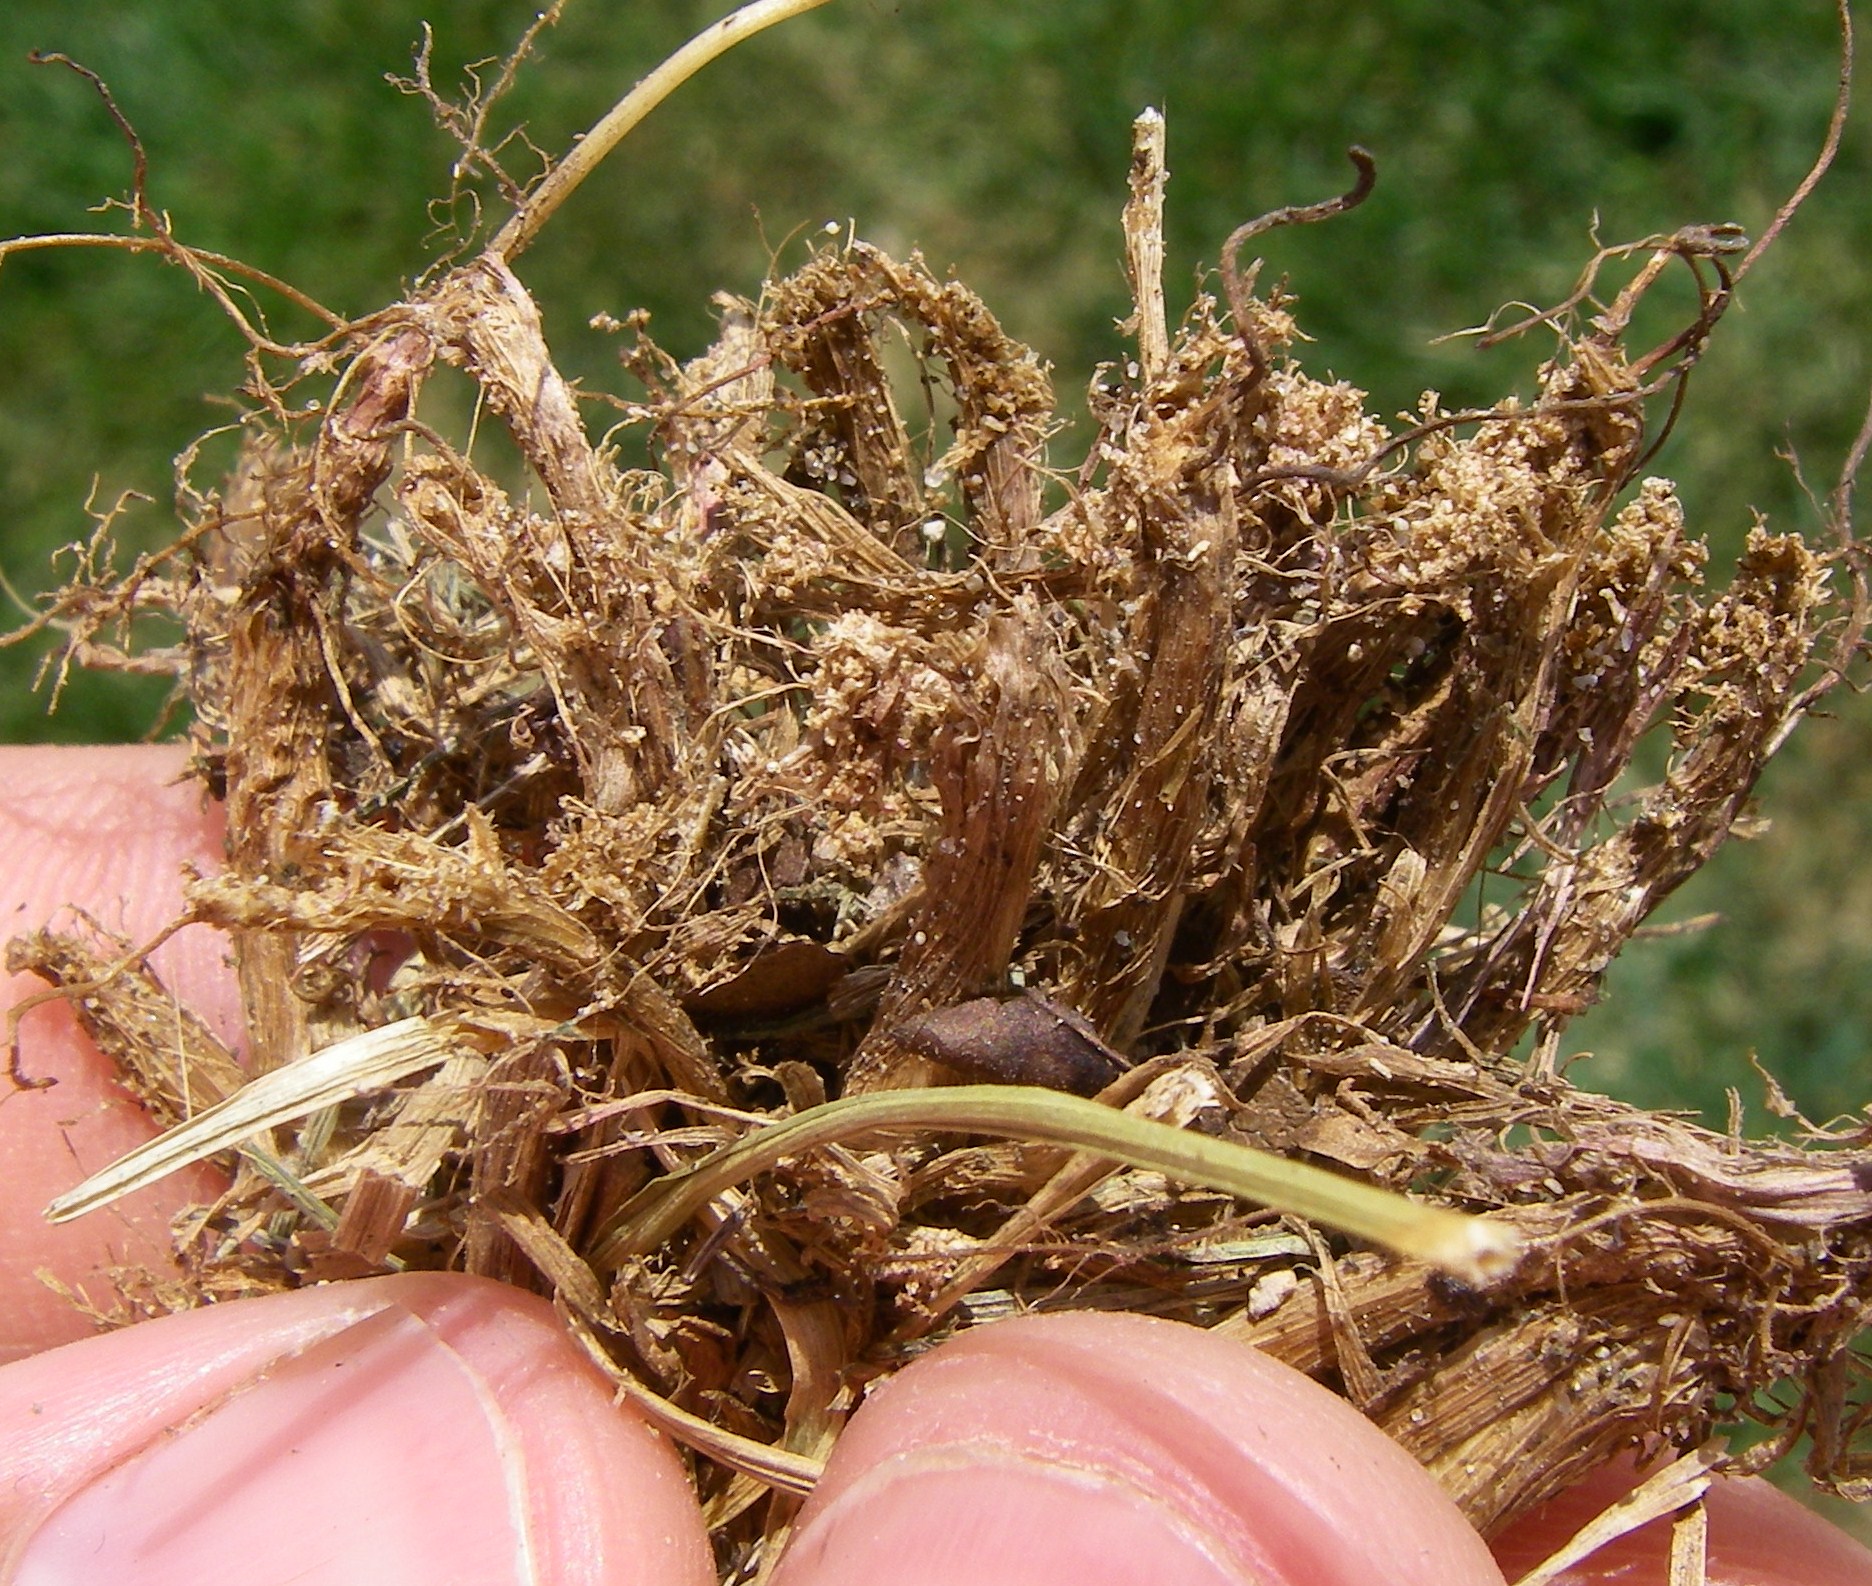  A tug-test can be used to examine the bottom-ends of Kentucky bluegrass tillers that pull easily from the sod and are filled with fine sawdust-like frass indicating billbug damage.